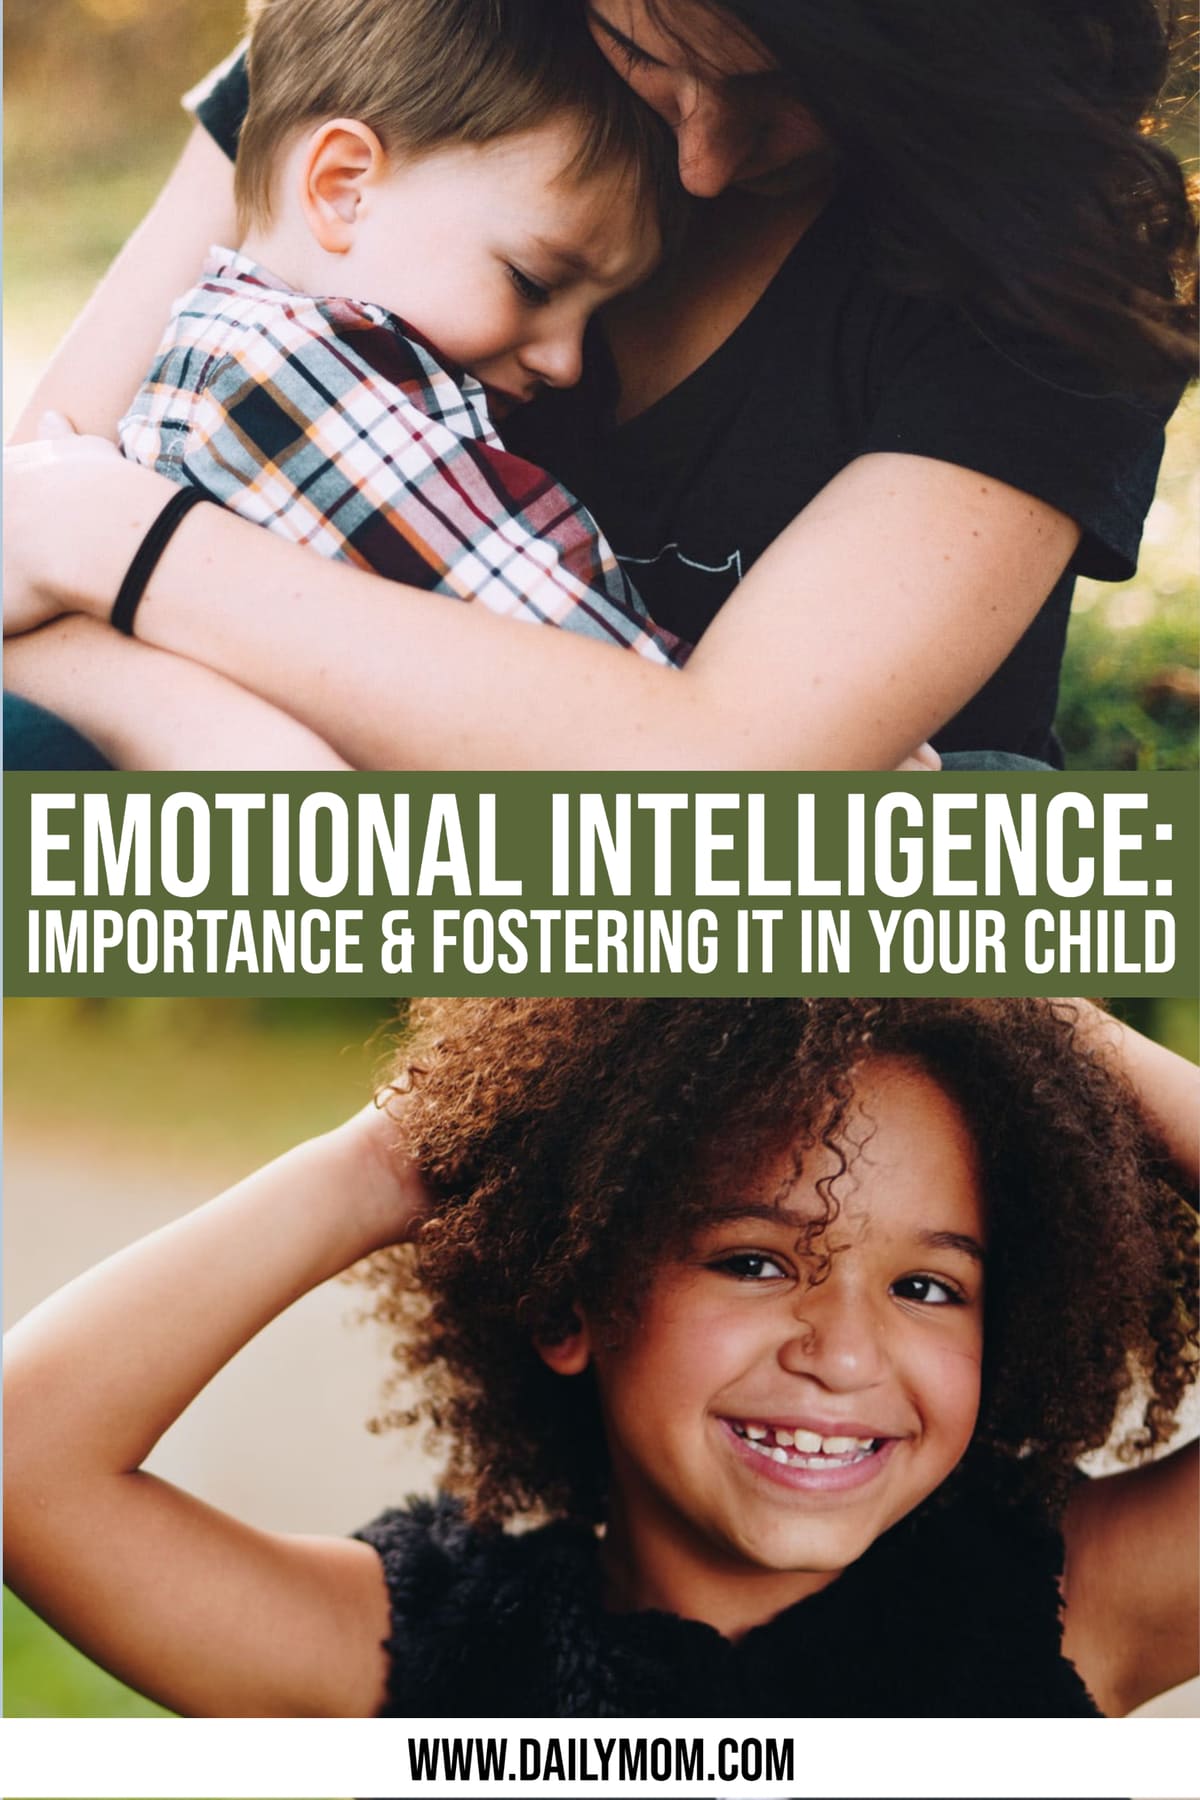 The Importance Of Emotional Intelligence And How To Foster It In Your Child